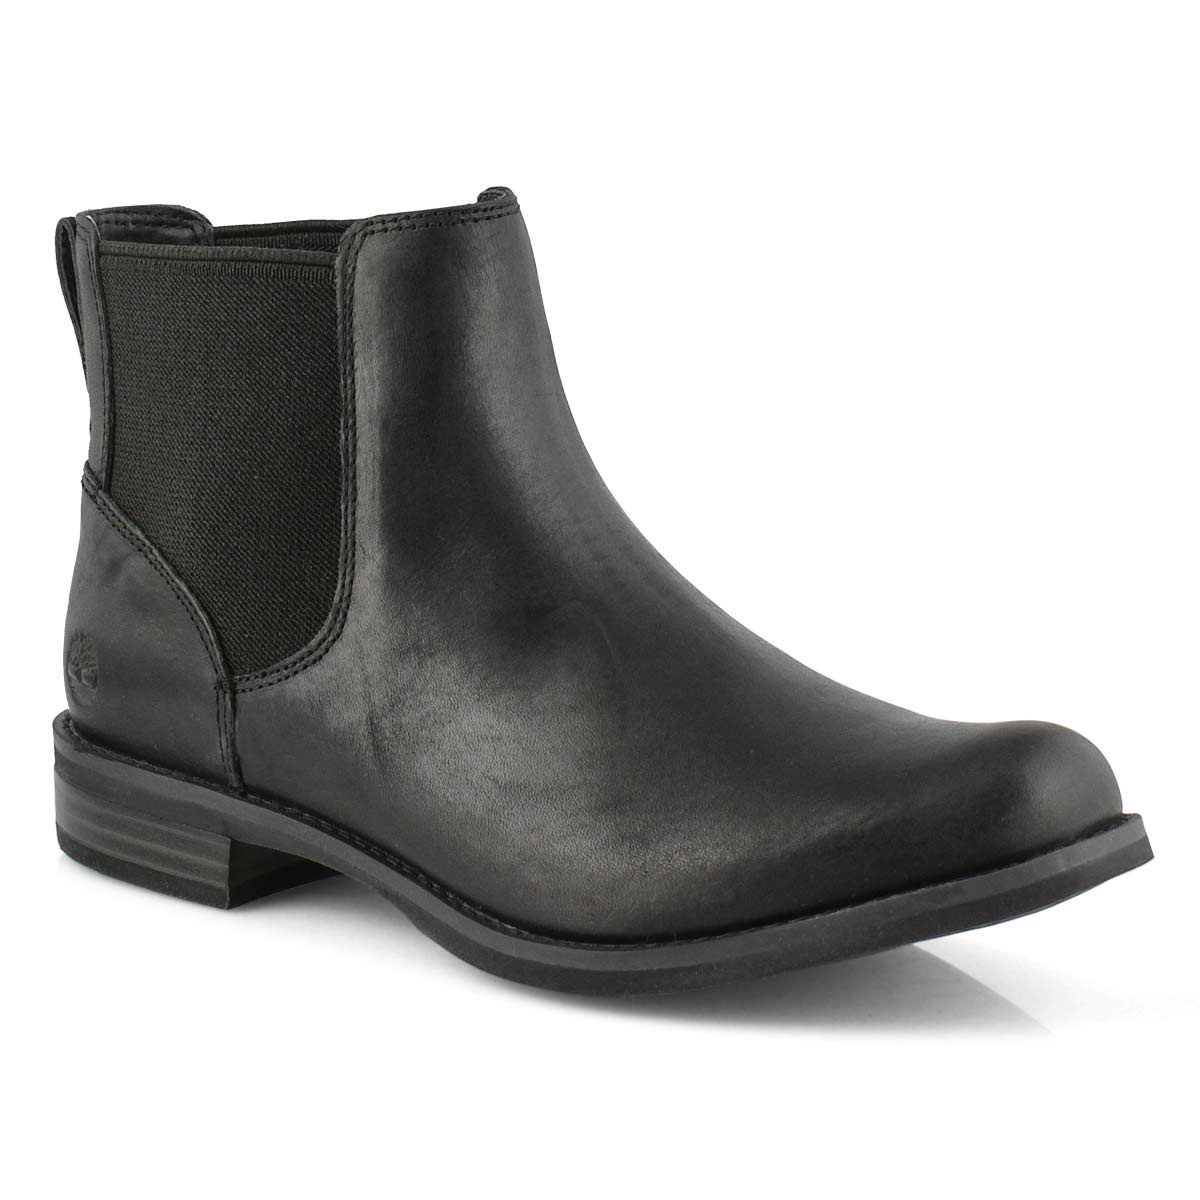 Timberland Women's Magby Chelsea Boot - Black | SoftMoc.com